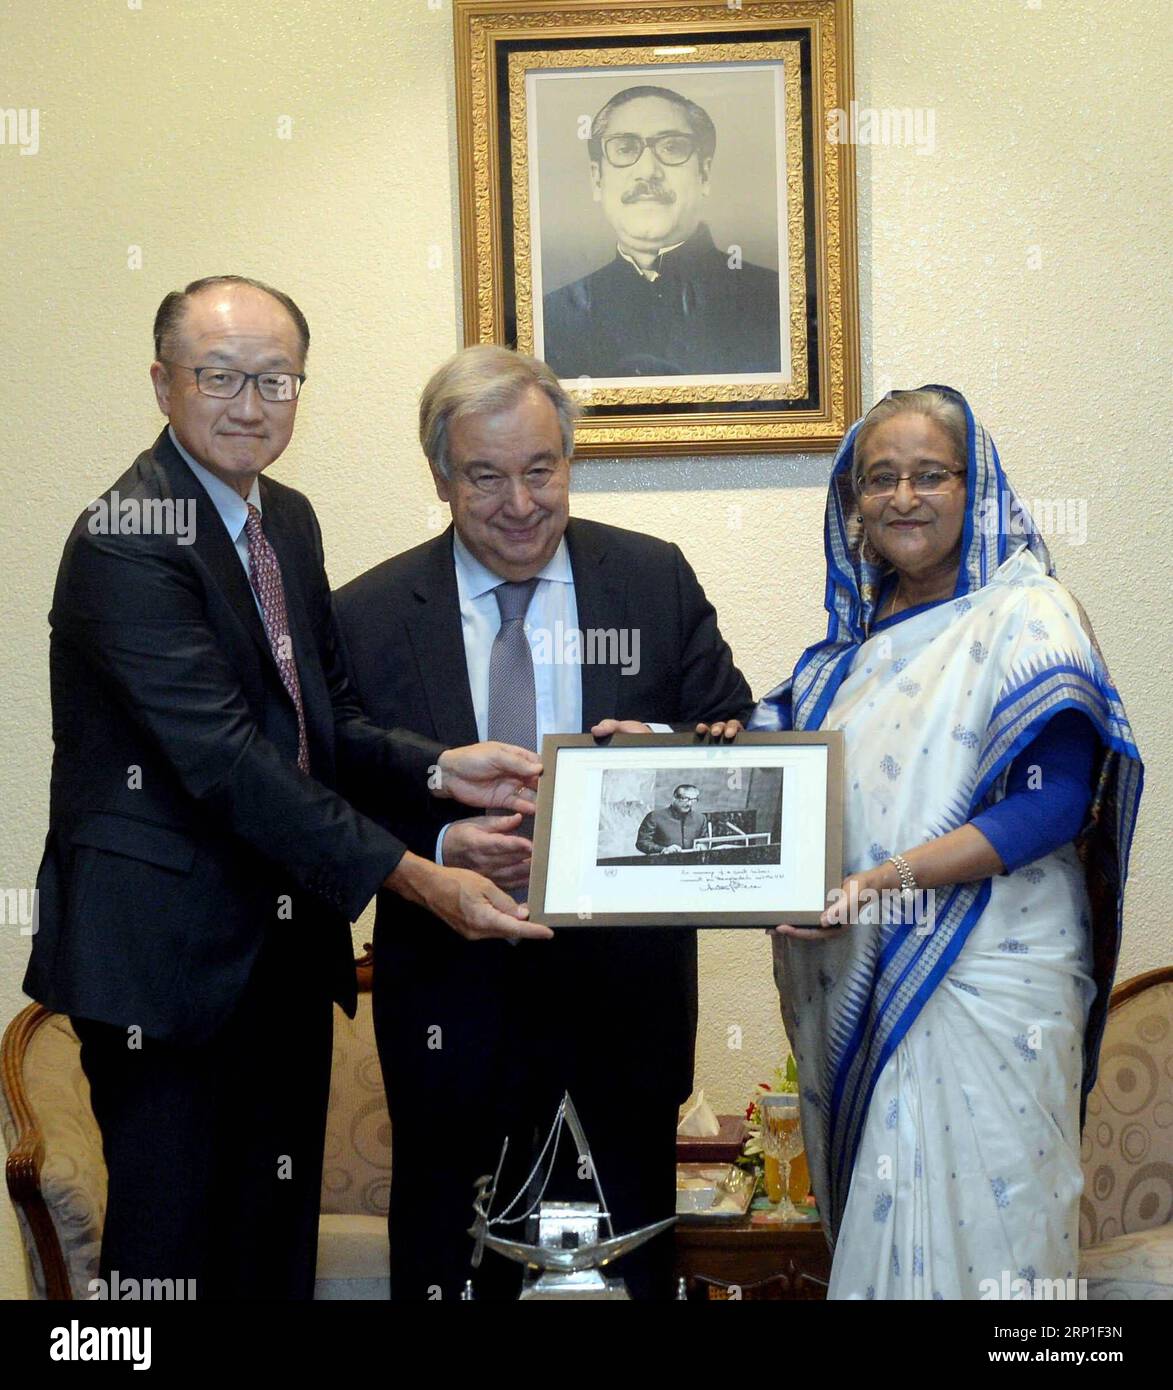 (180701) -- DHAKA, July 1, 2018 () -- United Nations Secretary-General Antonio Guterres (C) and World Bank President Jim Yong Kim (L) present to Bangladeshi Prime Minister Sheikh Hasina a photo of her father Bangabandhu Sheikh Mujibur Rahman, founding father of Bangladesh, in Dhaka, Bangladesh, on July 1, 2018. U.N. Secretary-General Antonio Guterres arrived here early Sunday in a joint visit with World Bank President Jim Yong Kim to assess the needs for the nearly one million Rohingya refugees driven from their homes in Myanmar. () BANGLADESH-DHAKA-UN-WORLD BANK-JOINT VISIT Xinhua PUBLICATION Stock Photo